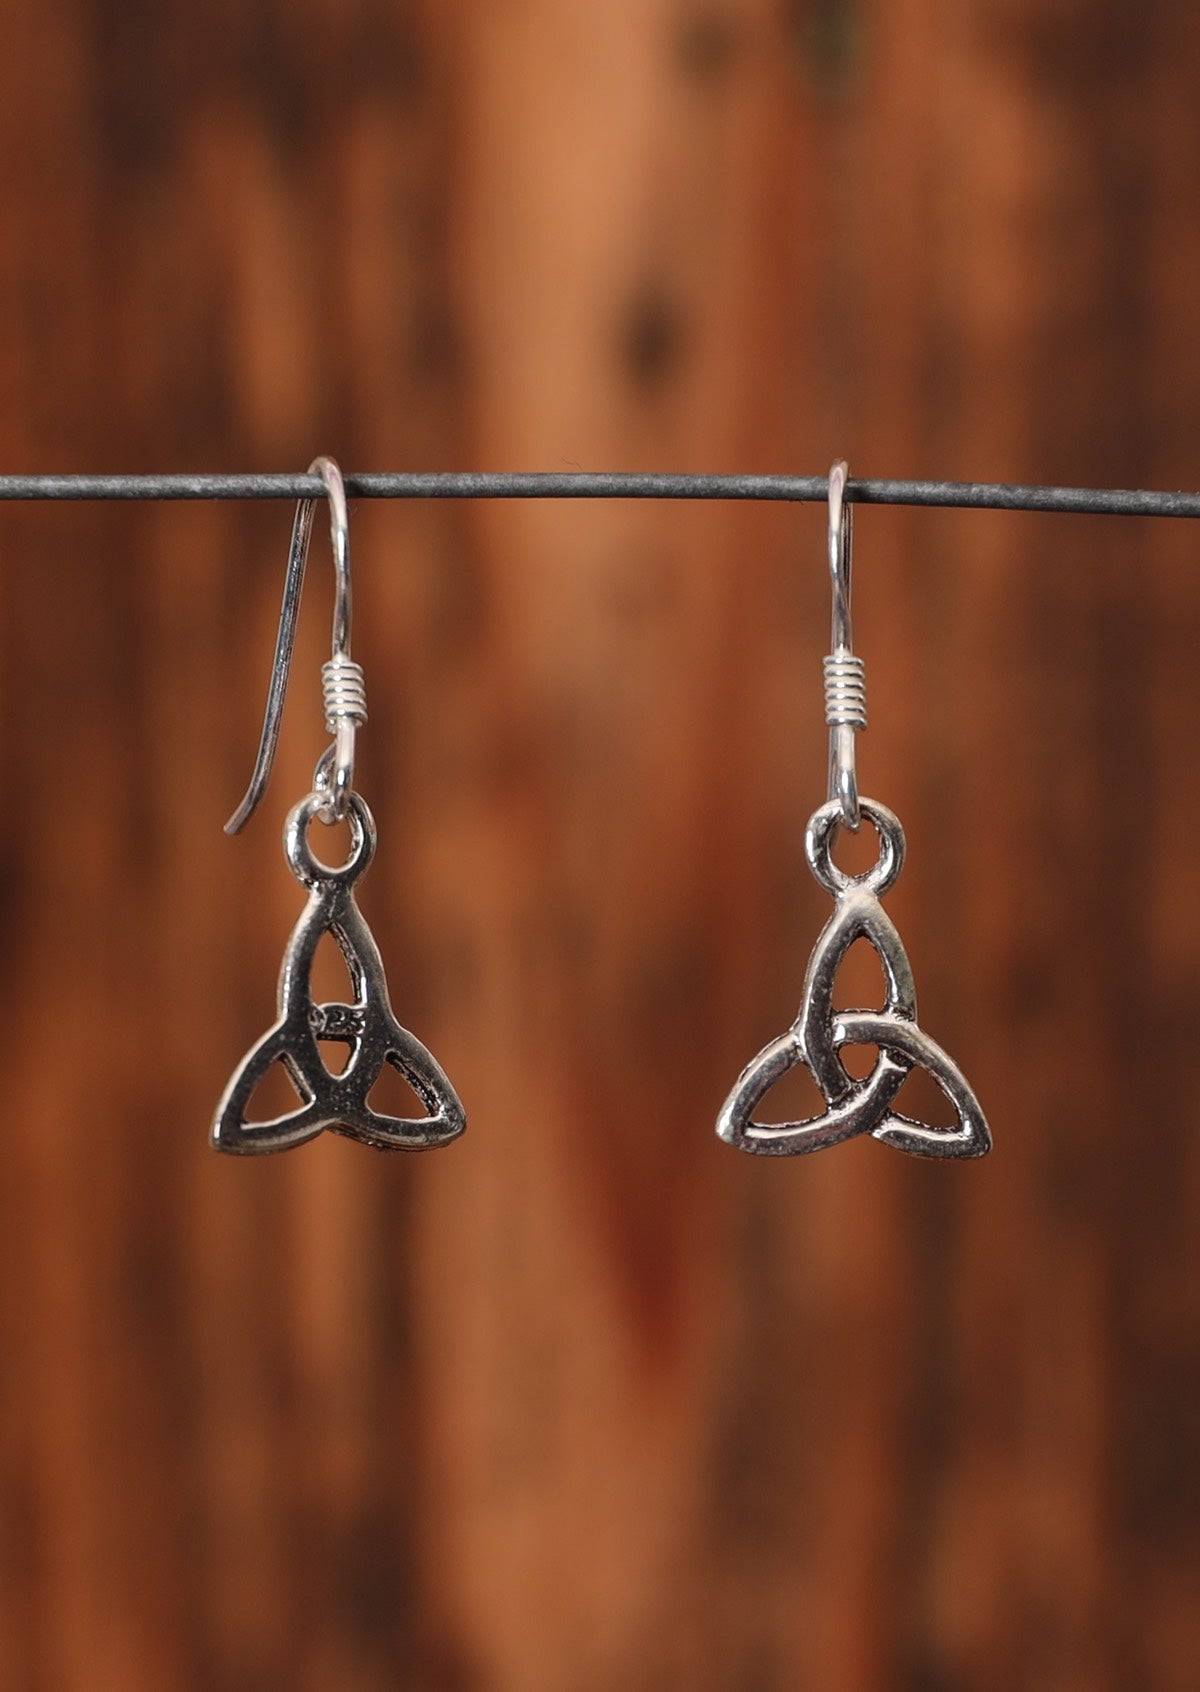 92.5% silver Triquetra earrings on a wire for display.